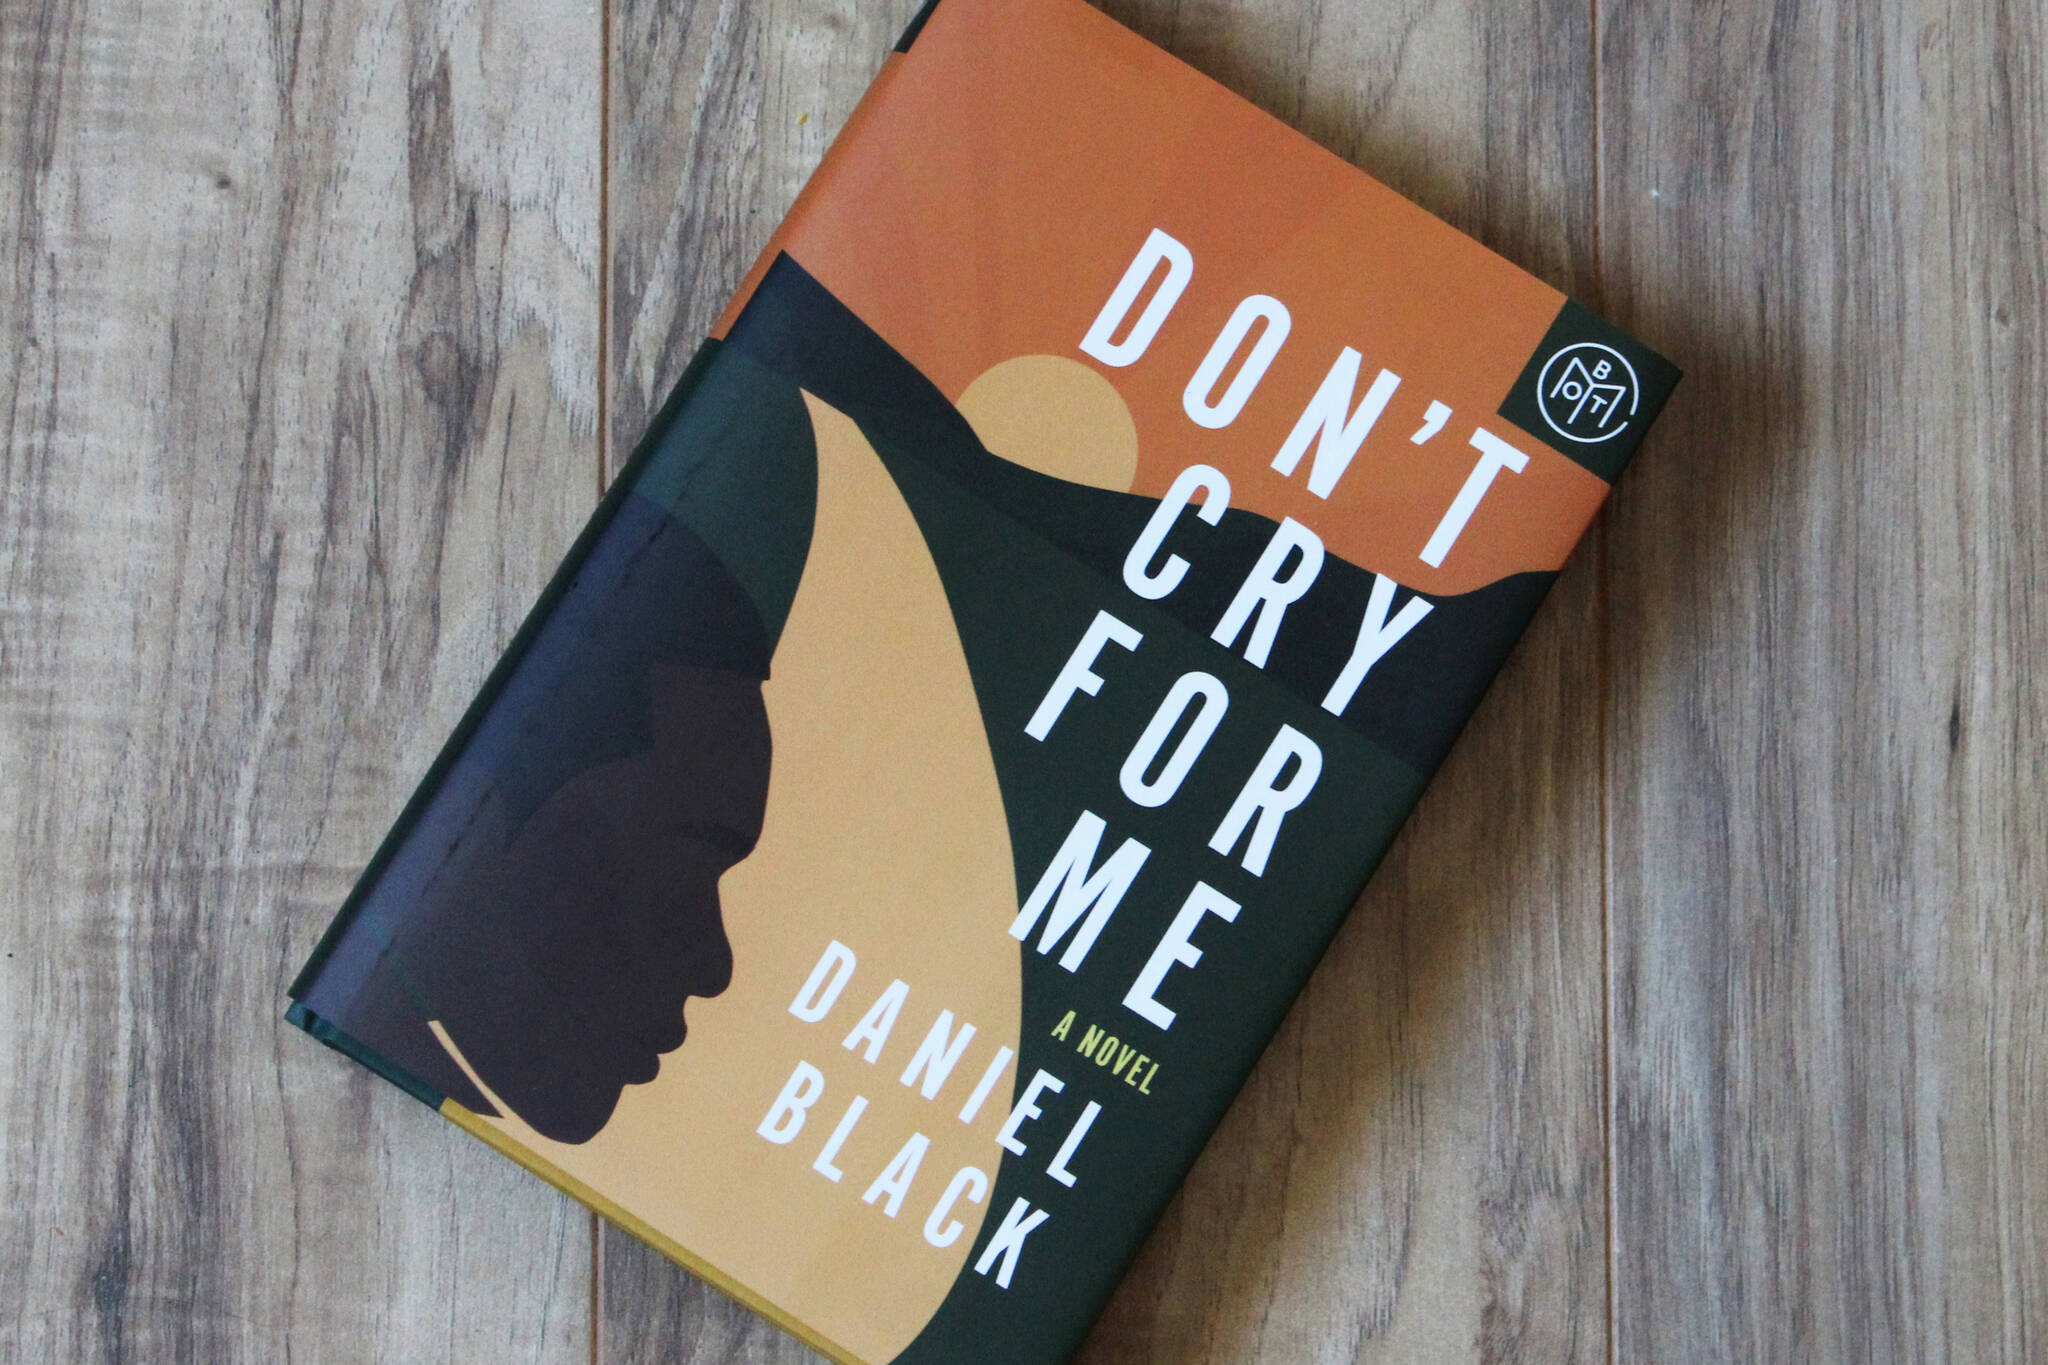 A copy of Don’t Cry For Me is displayed on Tuesday, March 1, 2022 near Soldotna, Alaska. (Ashlyn O’Hara/Peninsula Clarion)